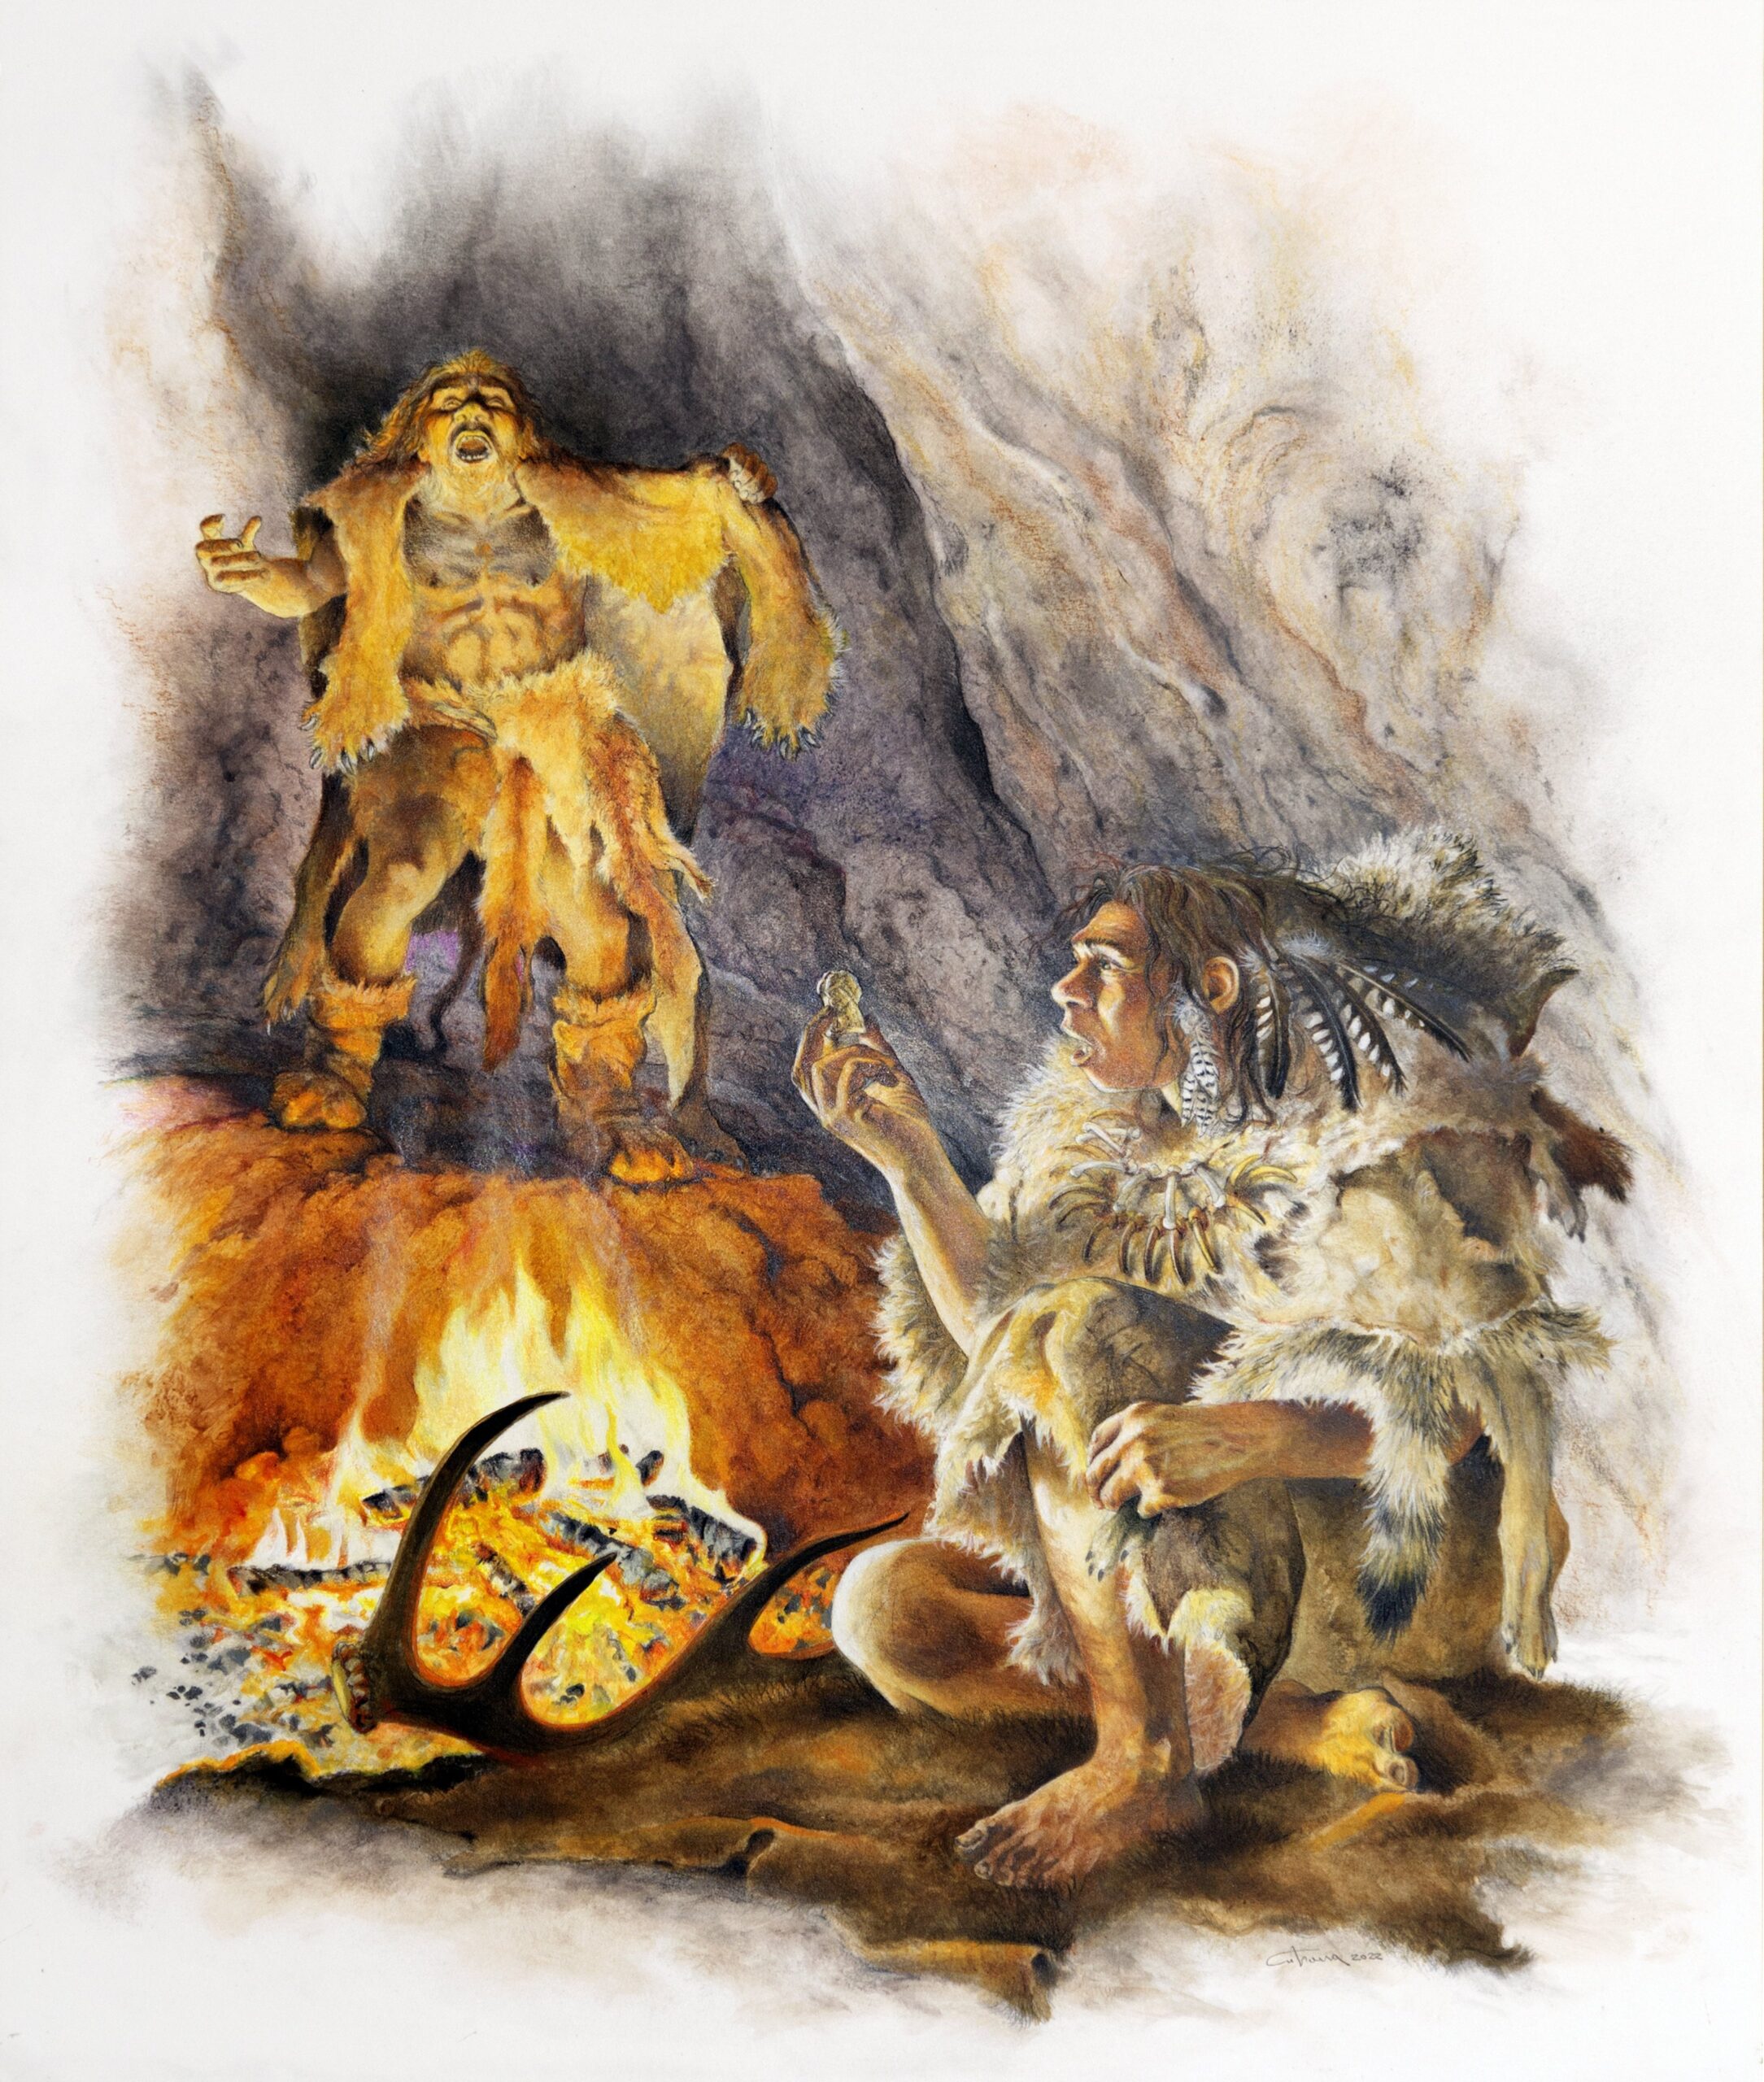 Finds from Einhornhöhle (Unicorn Cave) in the Harz Mountains demonstrate Neanderthals engraved bones (foreground) and valued lion skins (background). Illustration: Mauro Cutrona, ©NLD